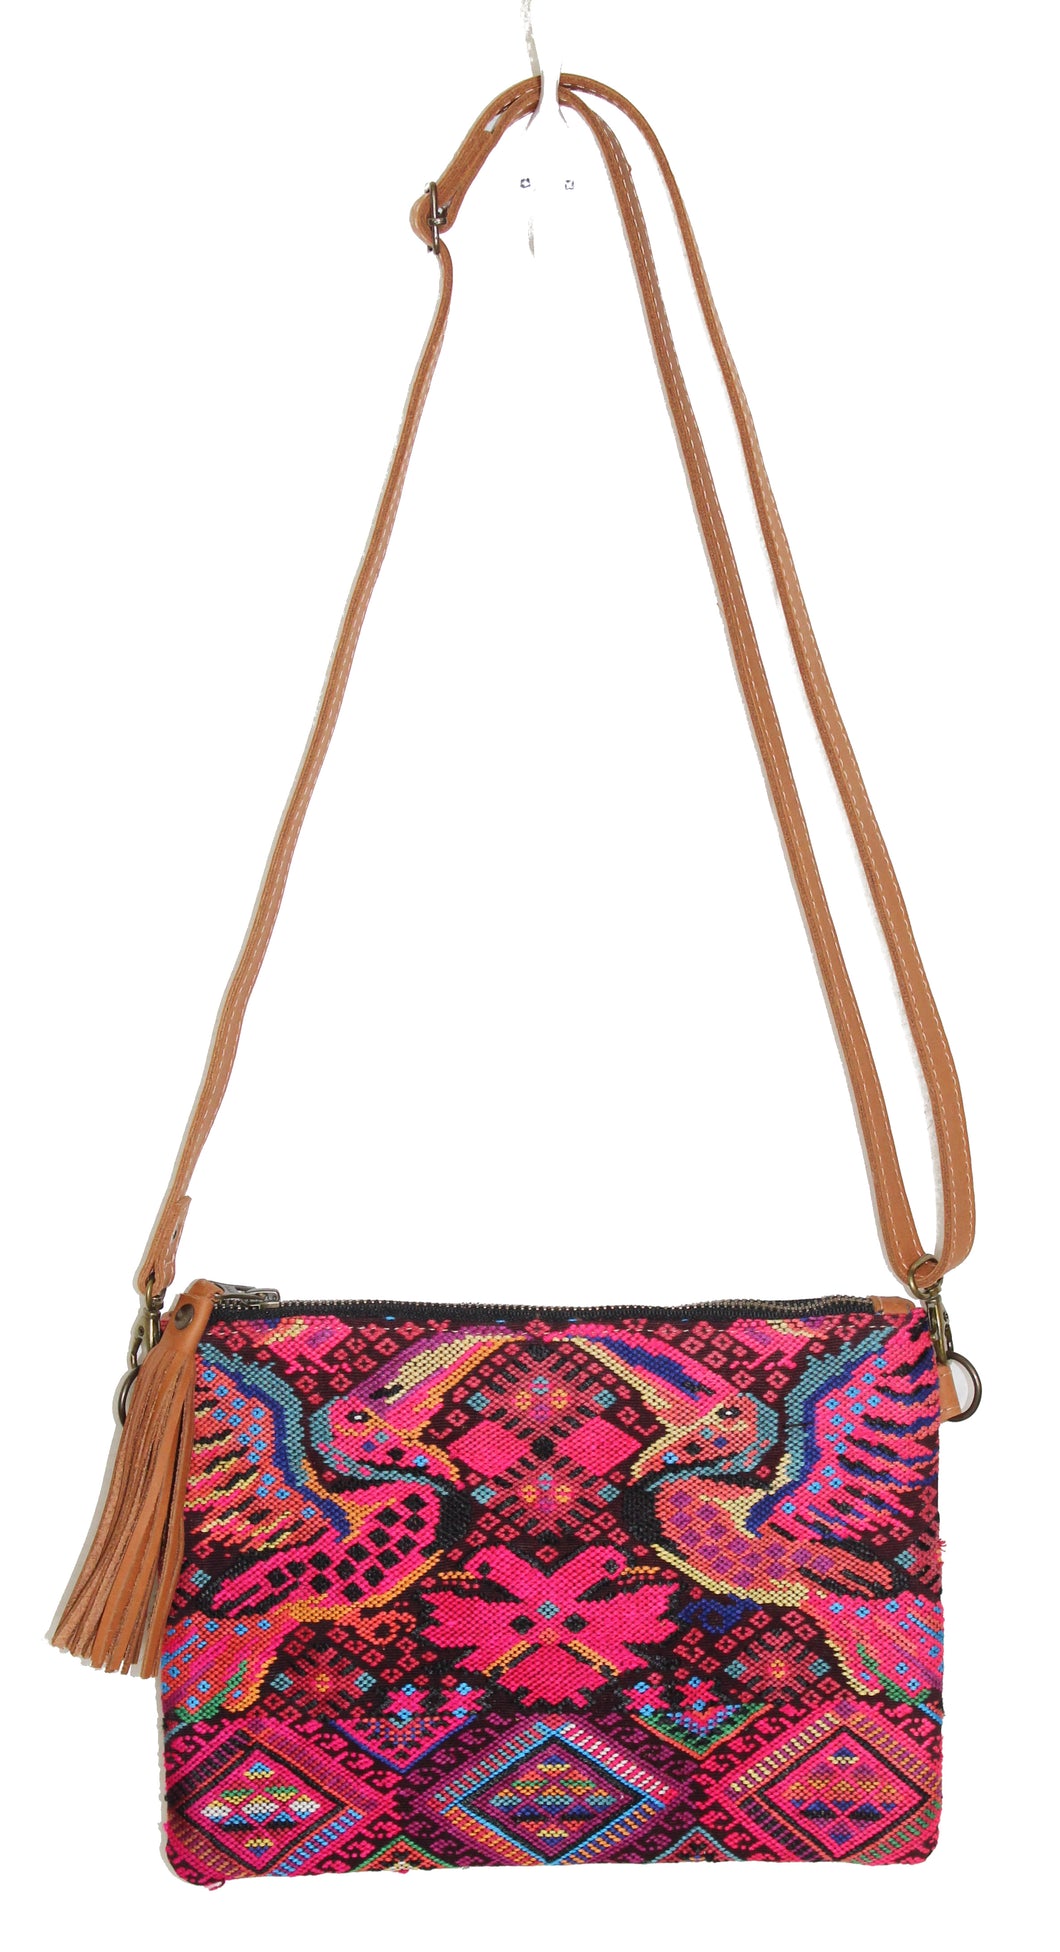 MoonLake Designs Lola small bag in pear tan leather, fringe tassel, and handwoven wildlife and geometric huipil